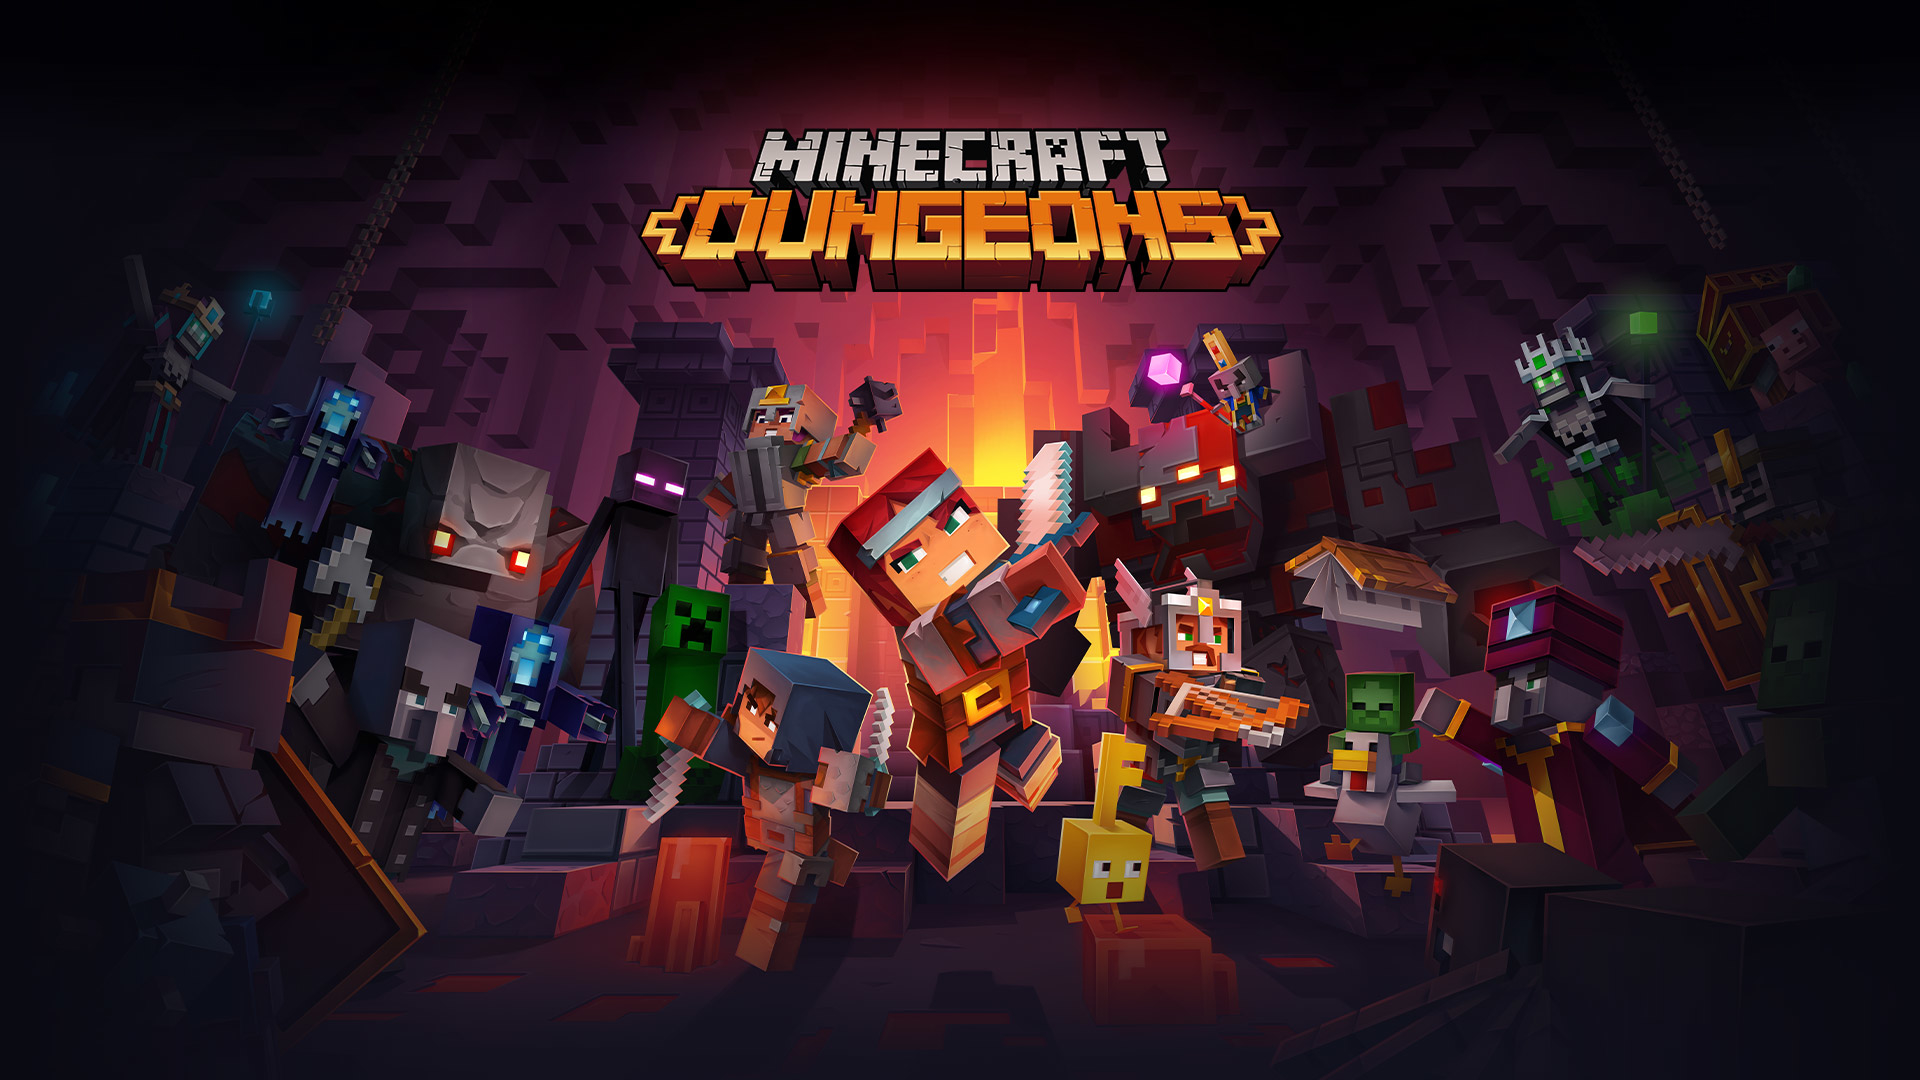 Minecraft Dungeons Poster Wallpaper Hd Games 4k Wallpapers Images Photos And Background